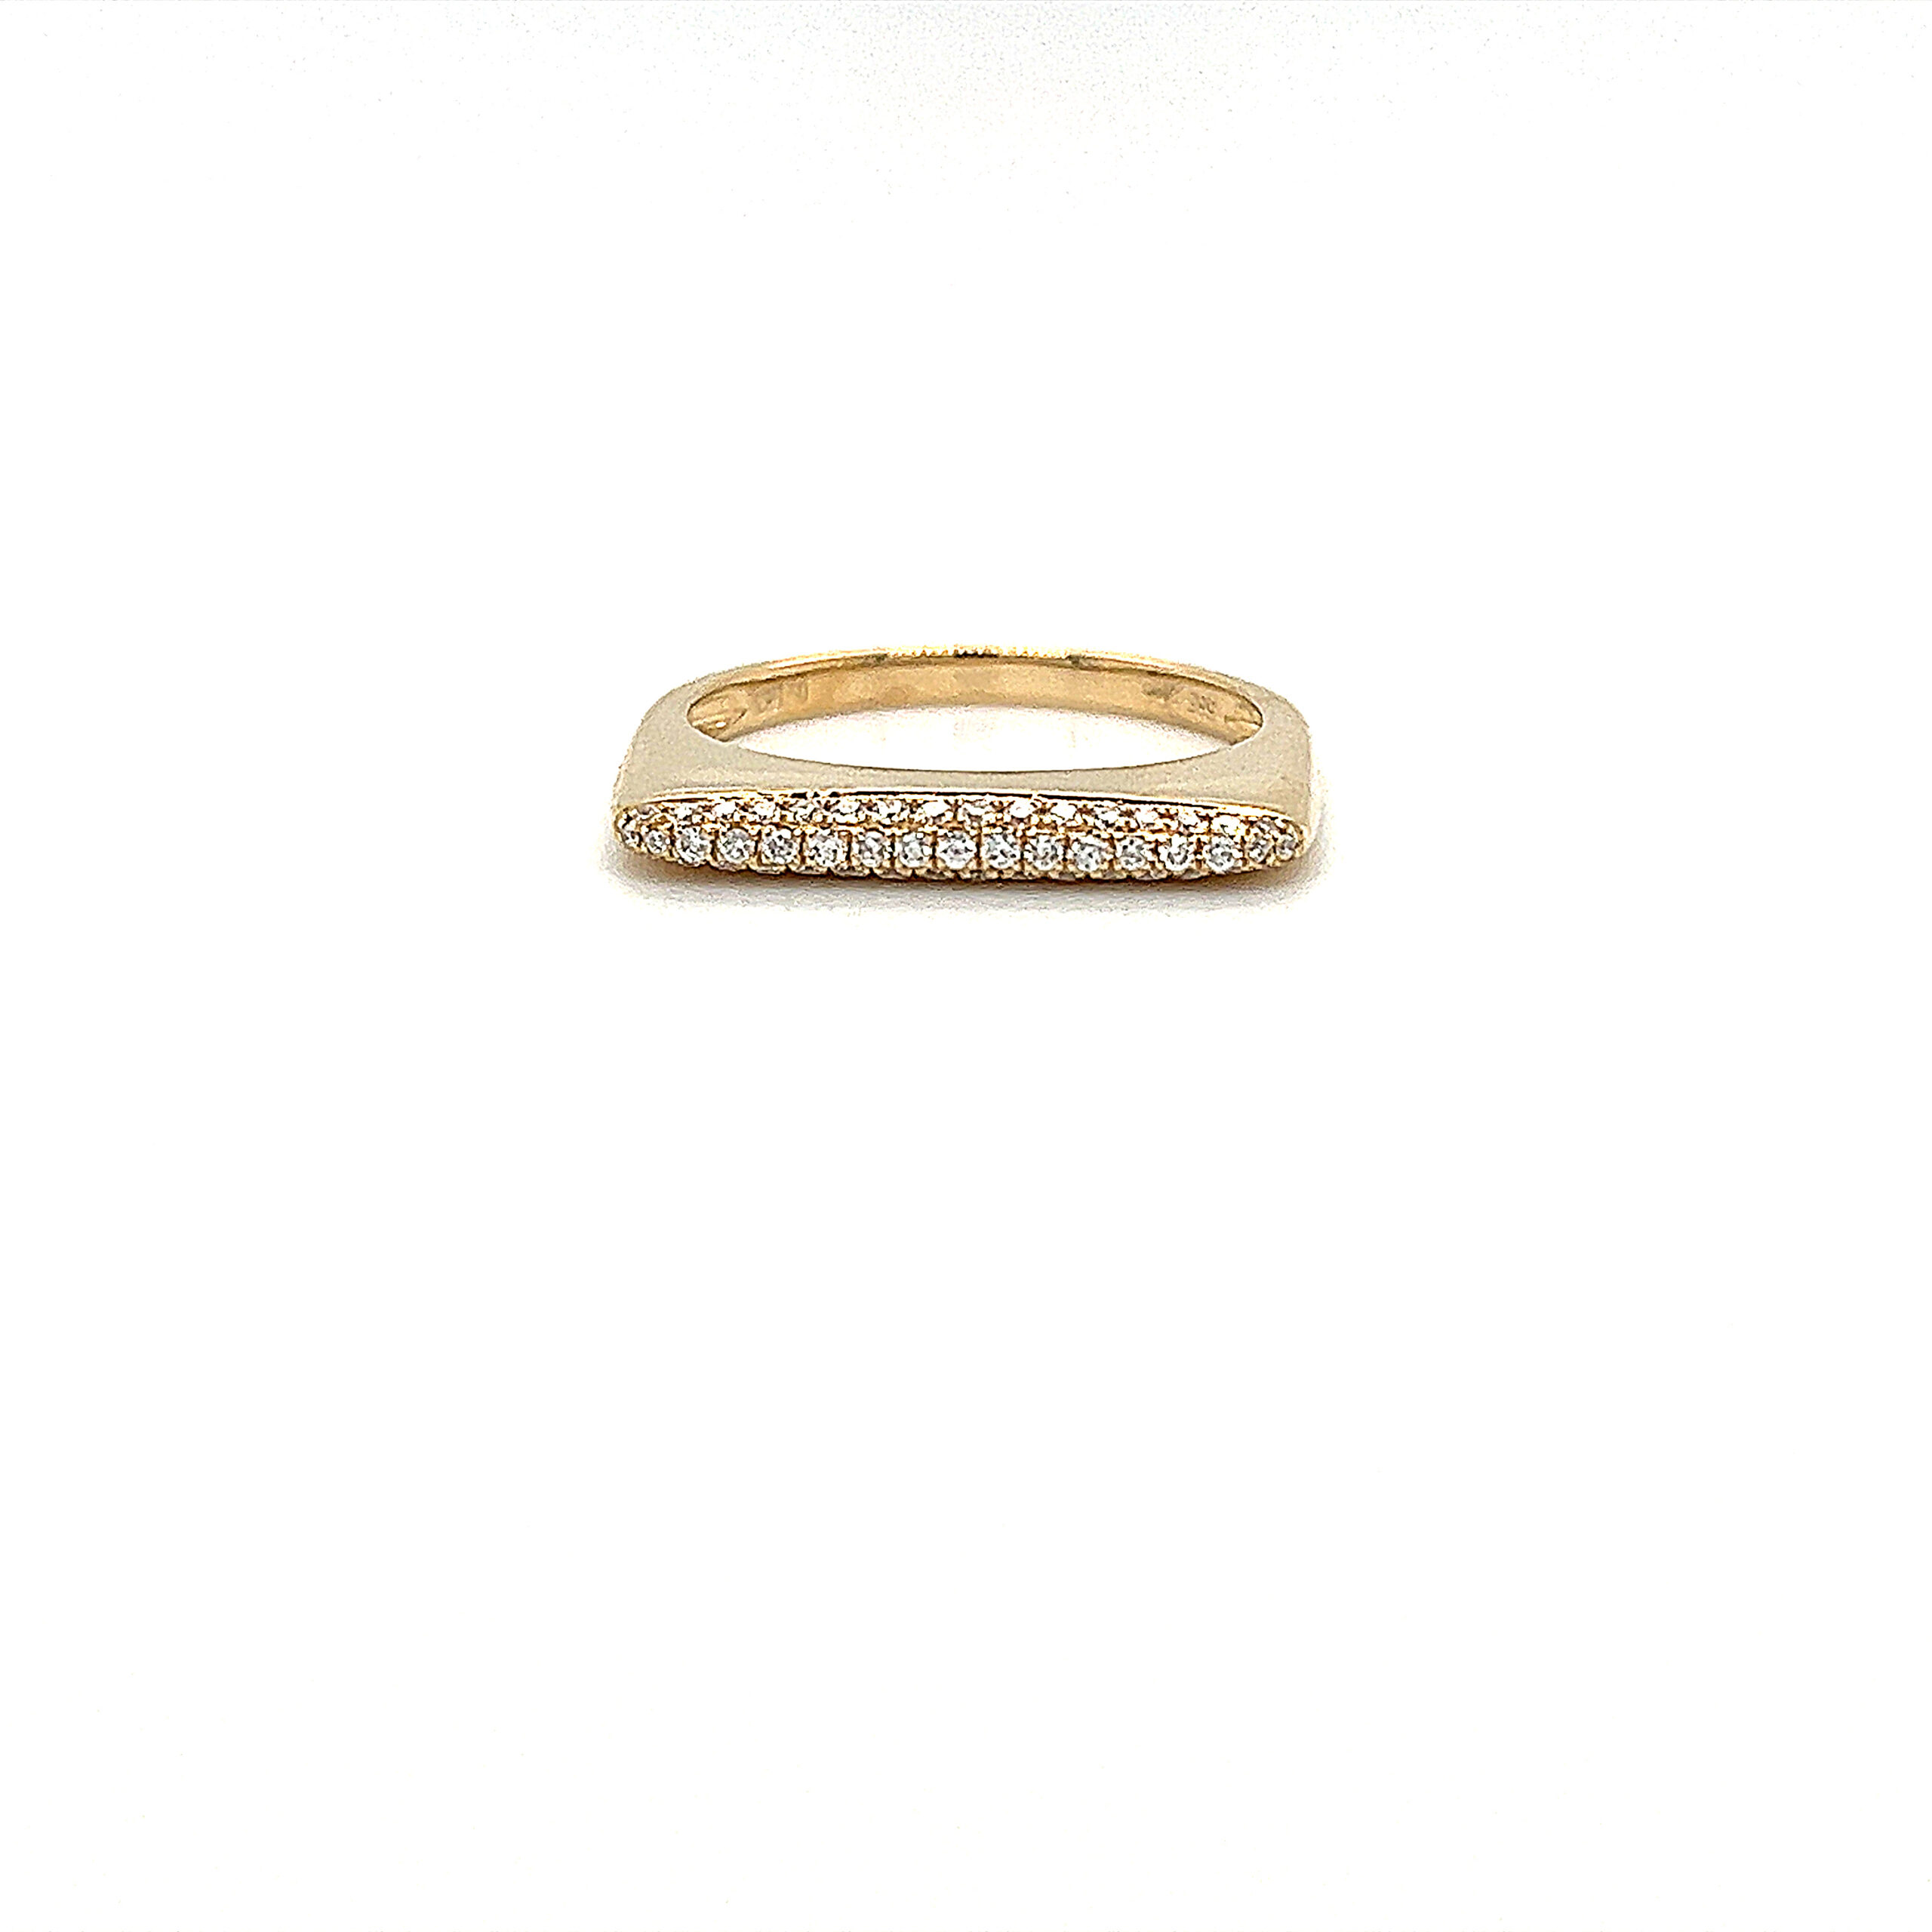 Featured image for “Contemporary 3 Row Diamond Ring”